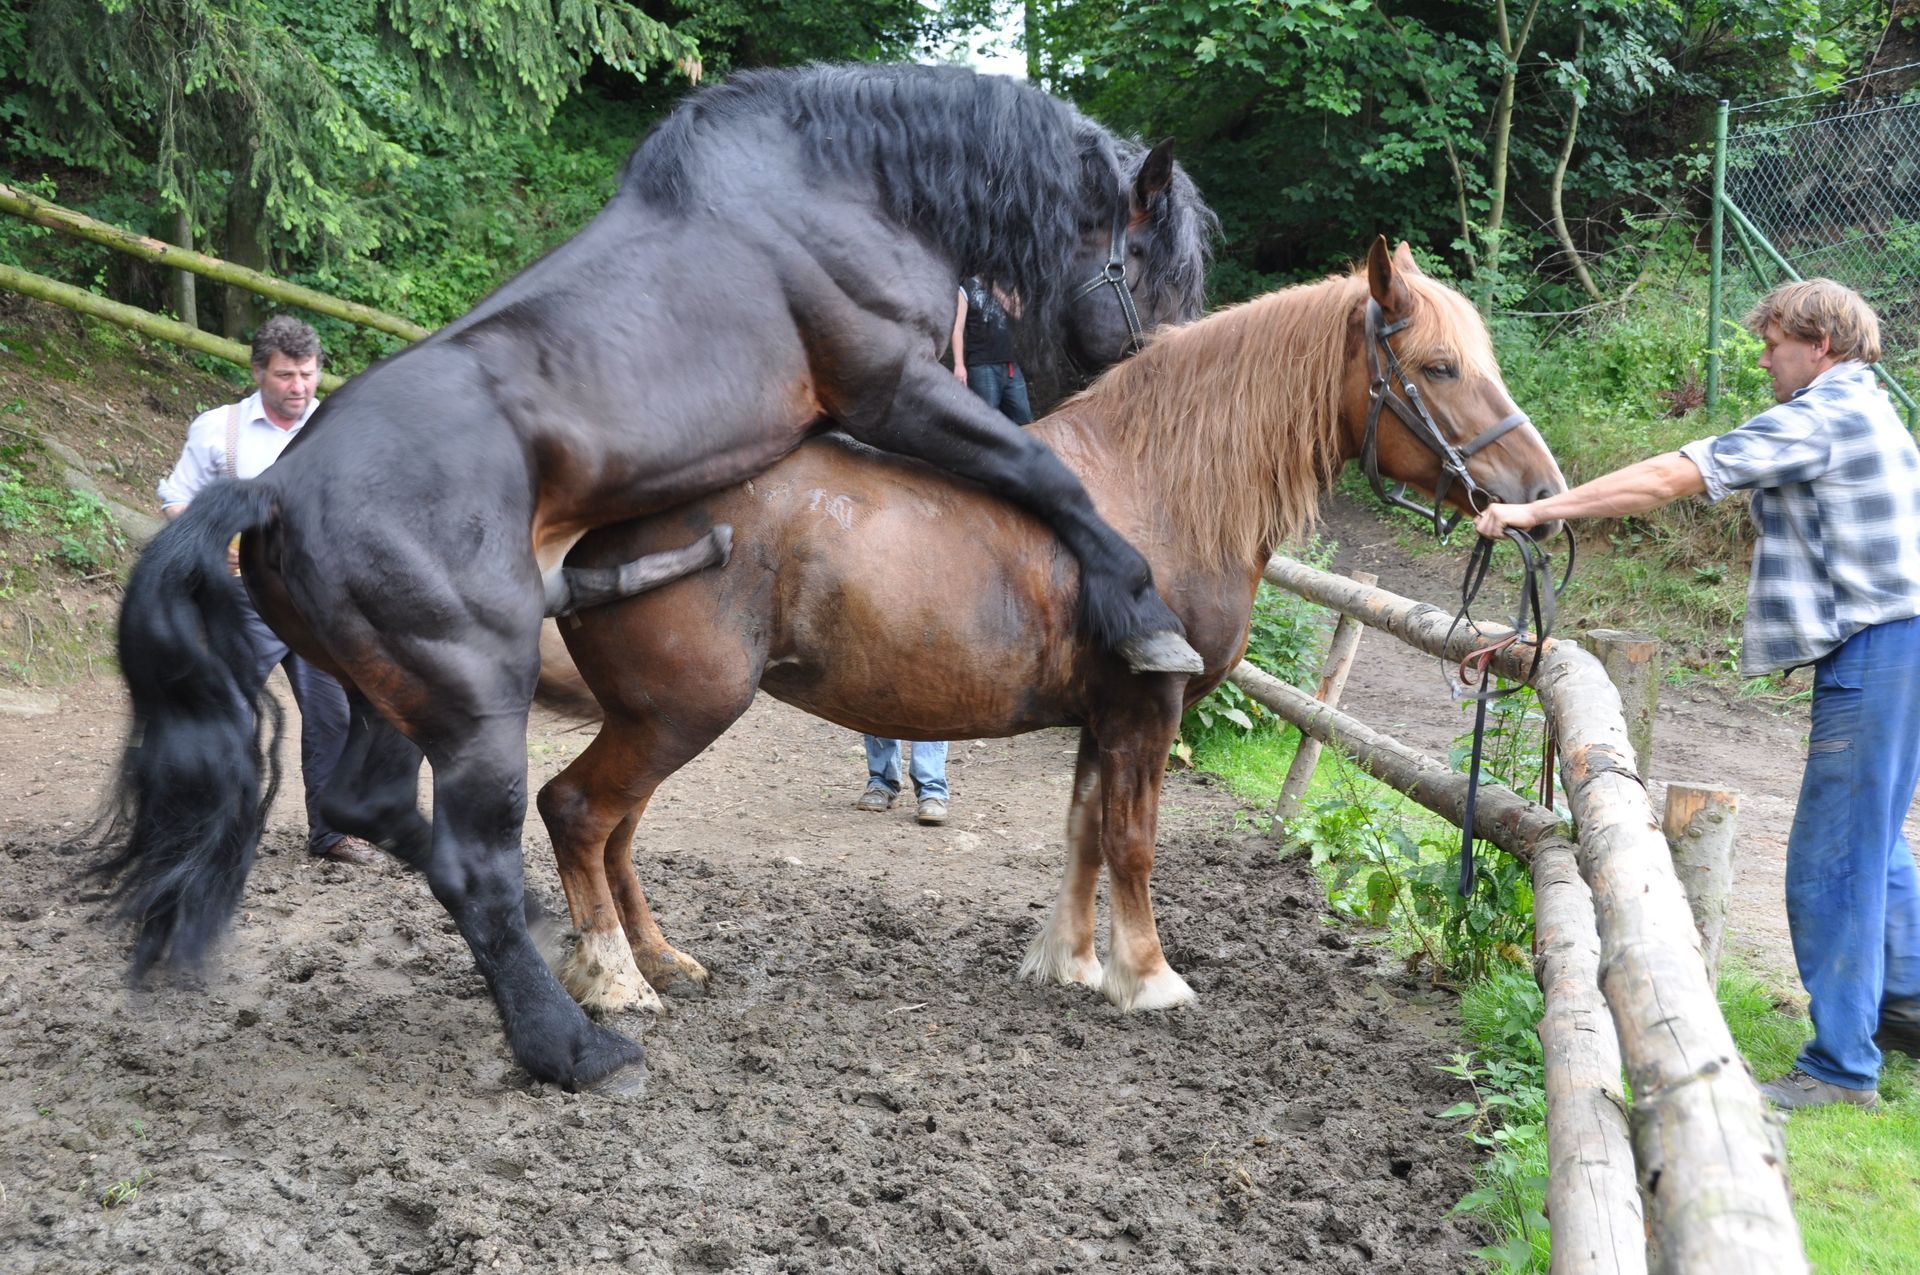 Horse Mating Pictures.